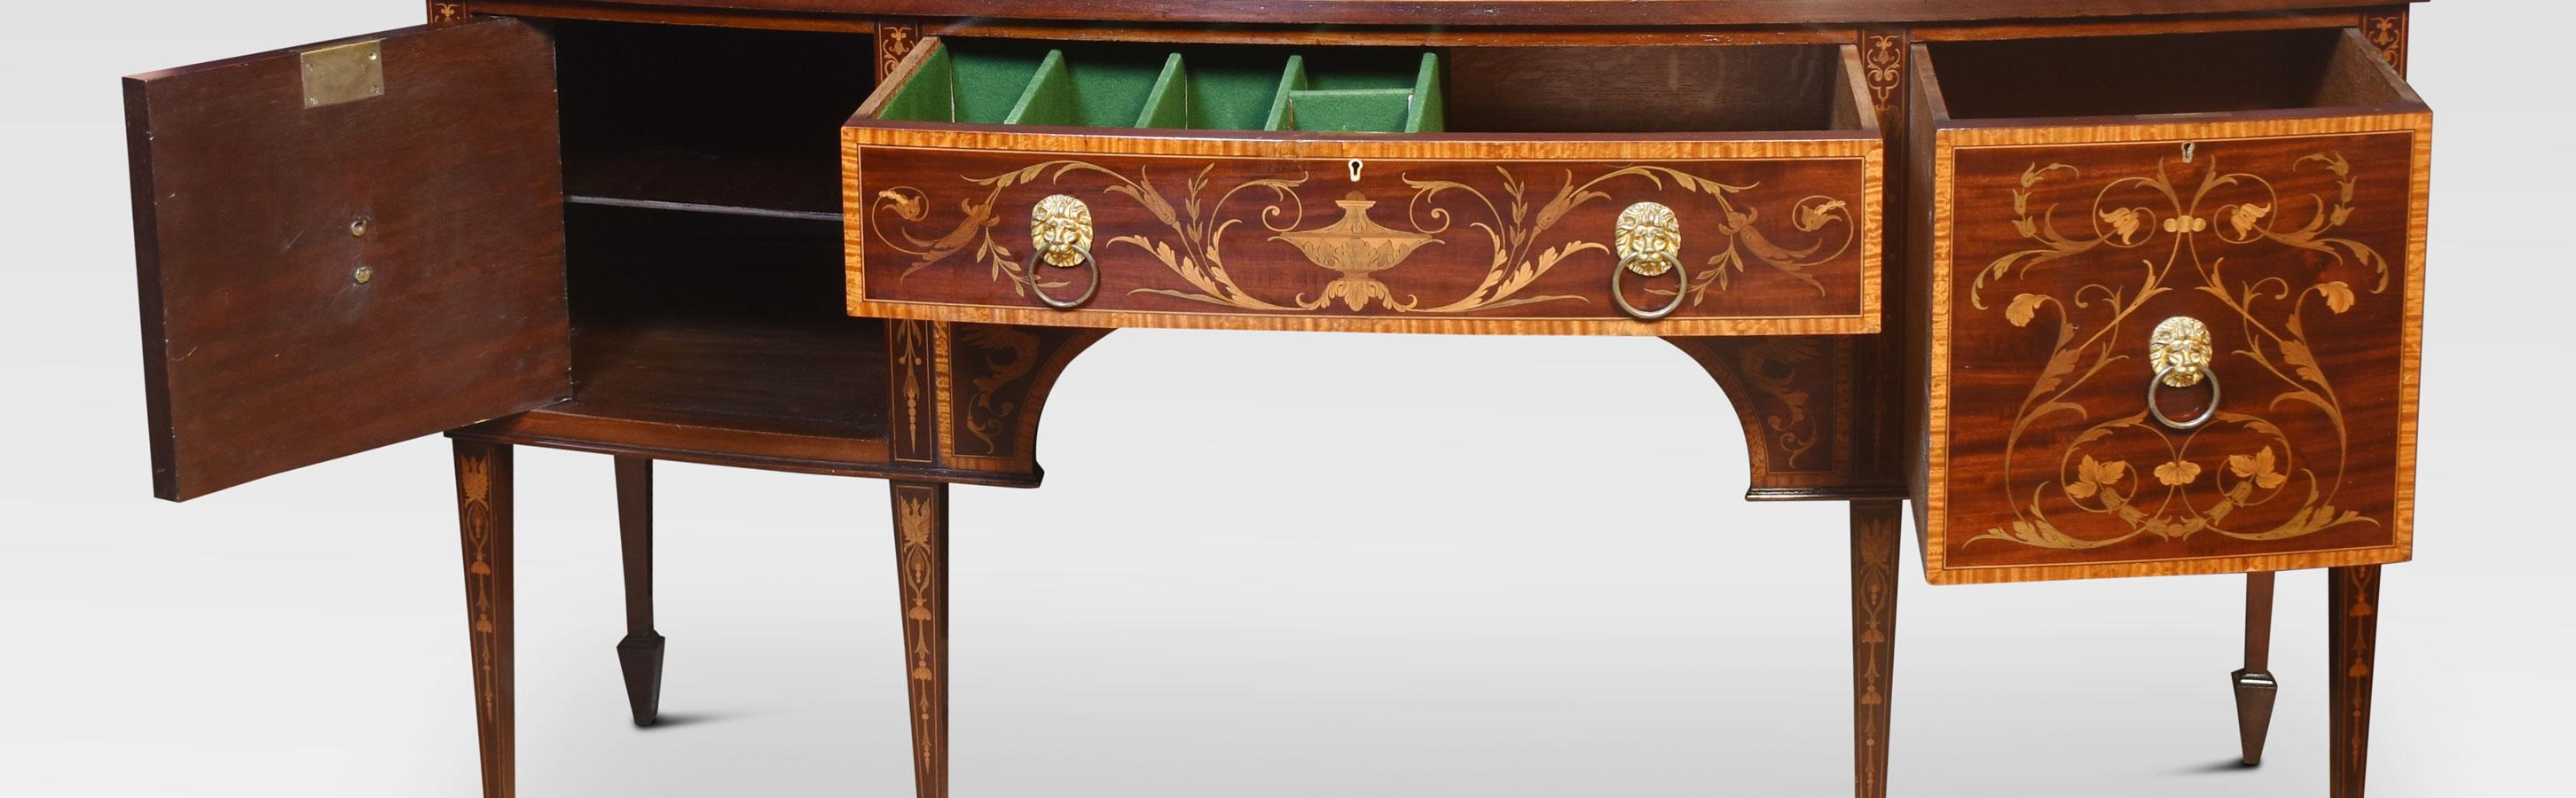 inlaid bow-fronted sideboard For Sale 1